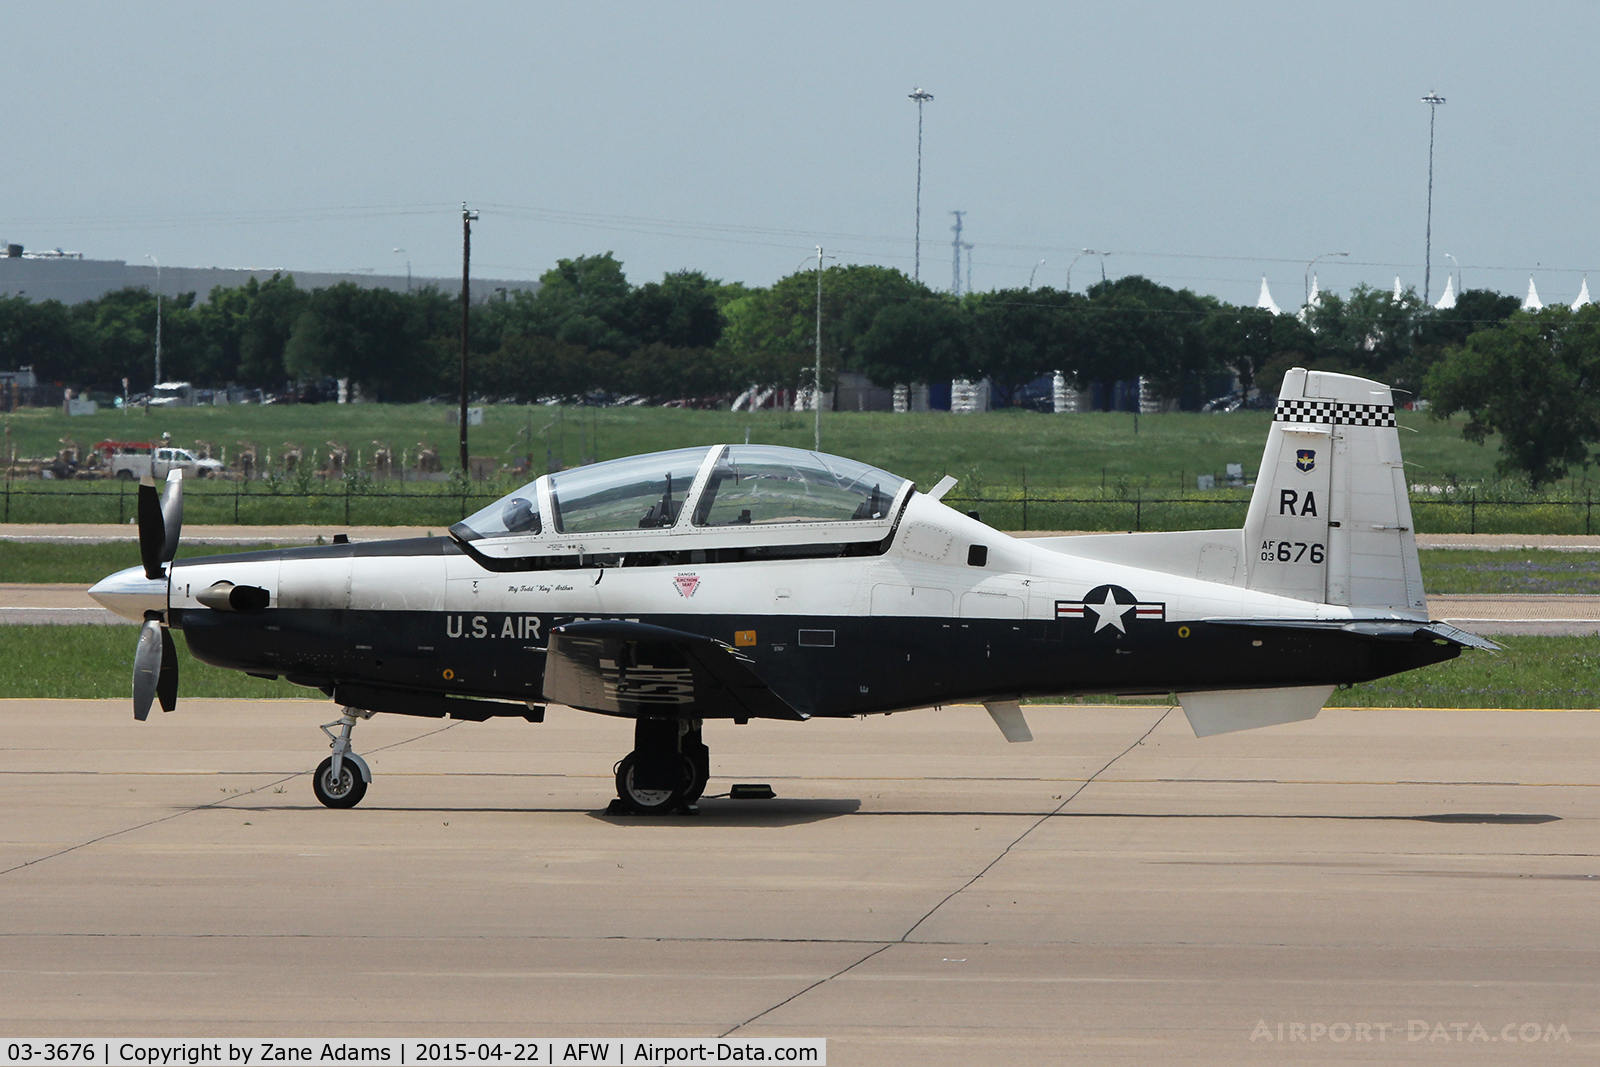 03-3676, 2003 Raytheon T-6A Texan II C/N PT-222, On the ramp at Alliance Airport - Fort Worth, Texas